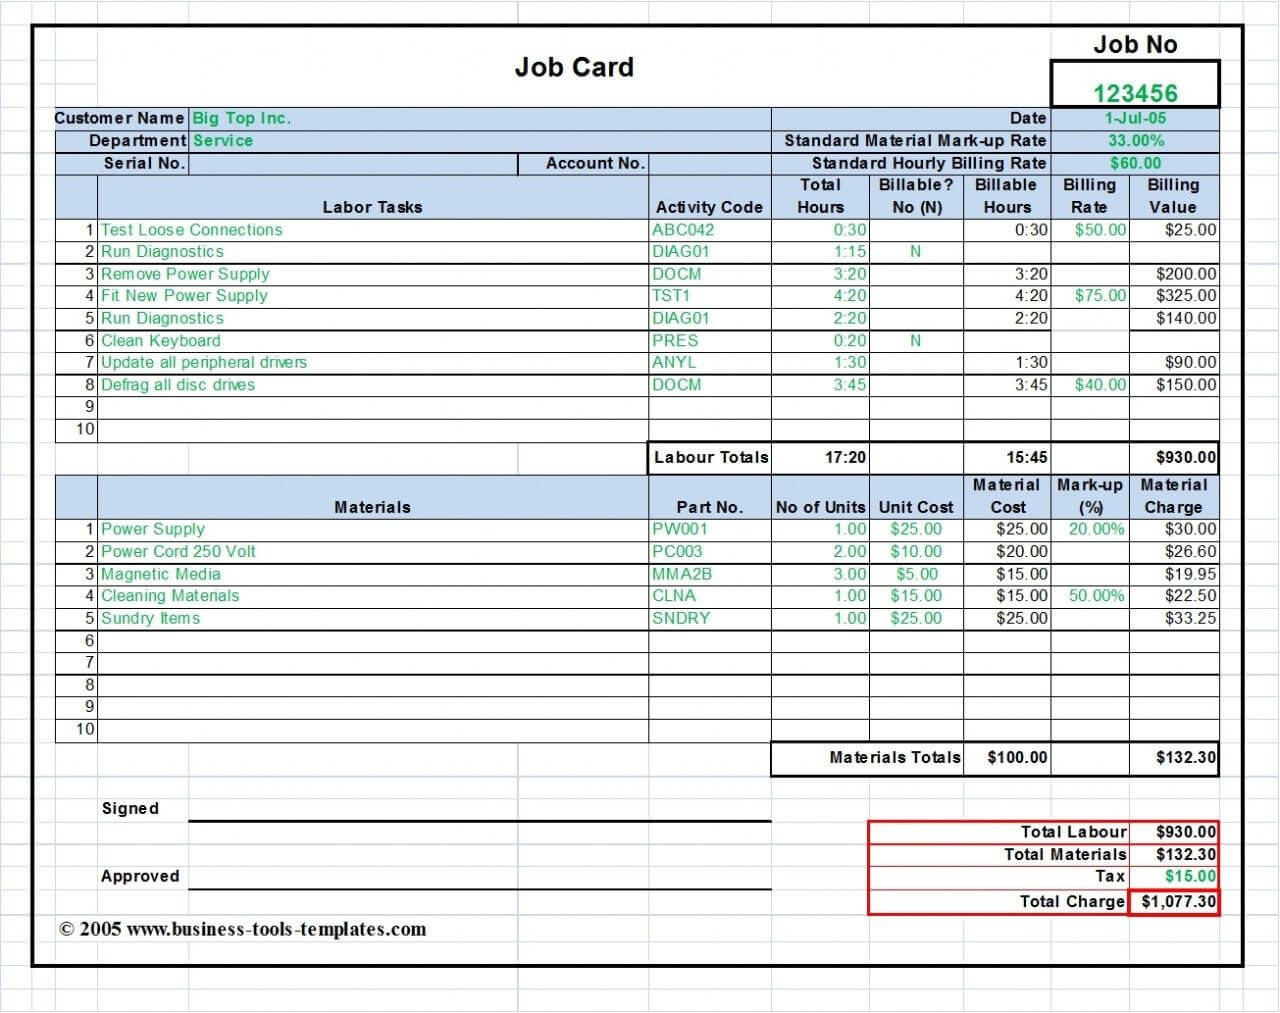 Workshop Job Card Template Excel, Labor & Material Cost In Mechanics Job Card Template